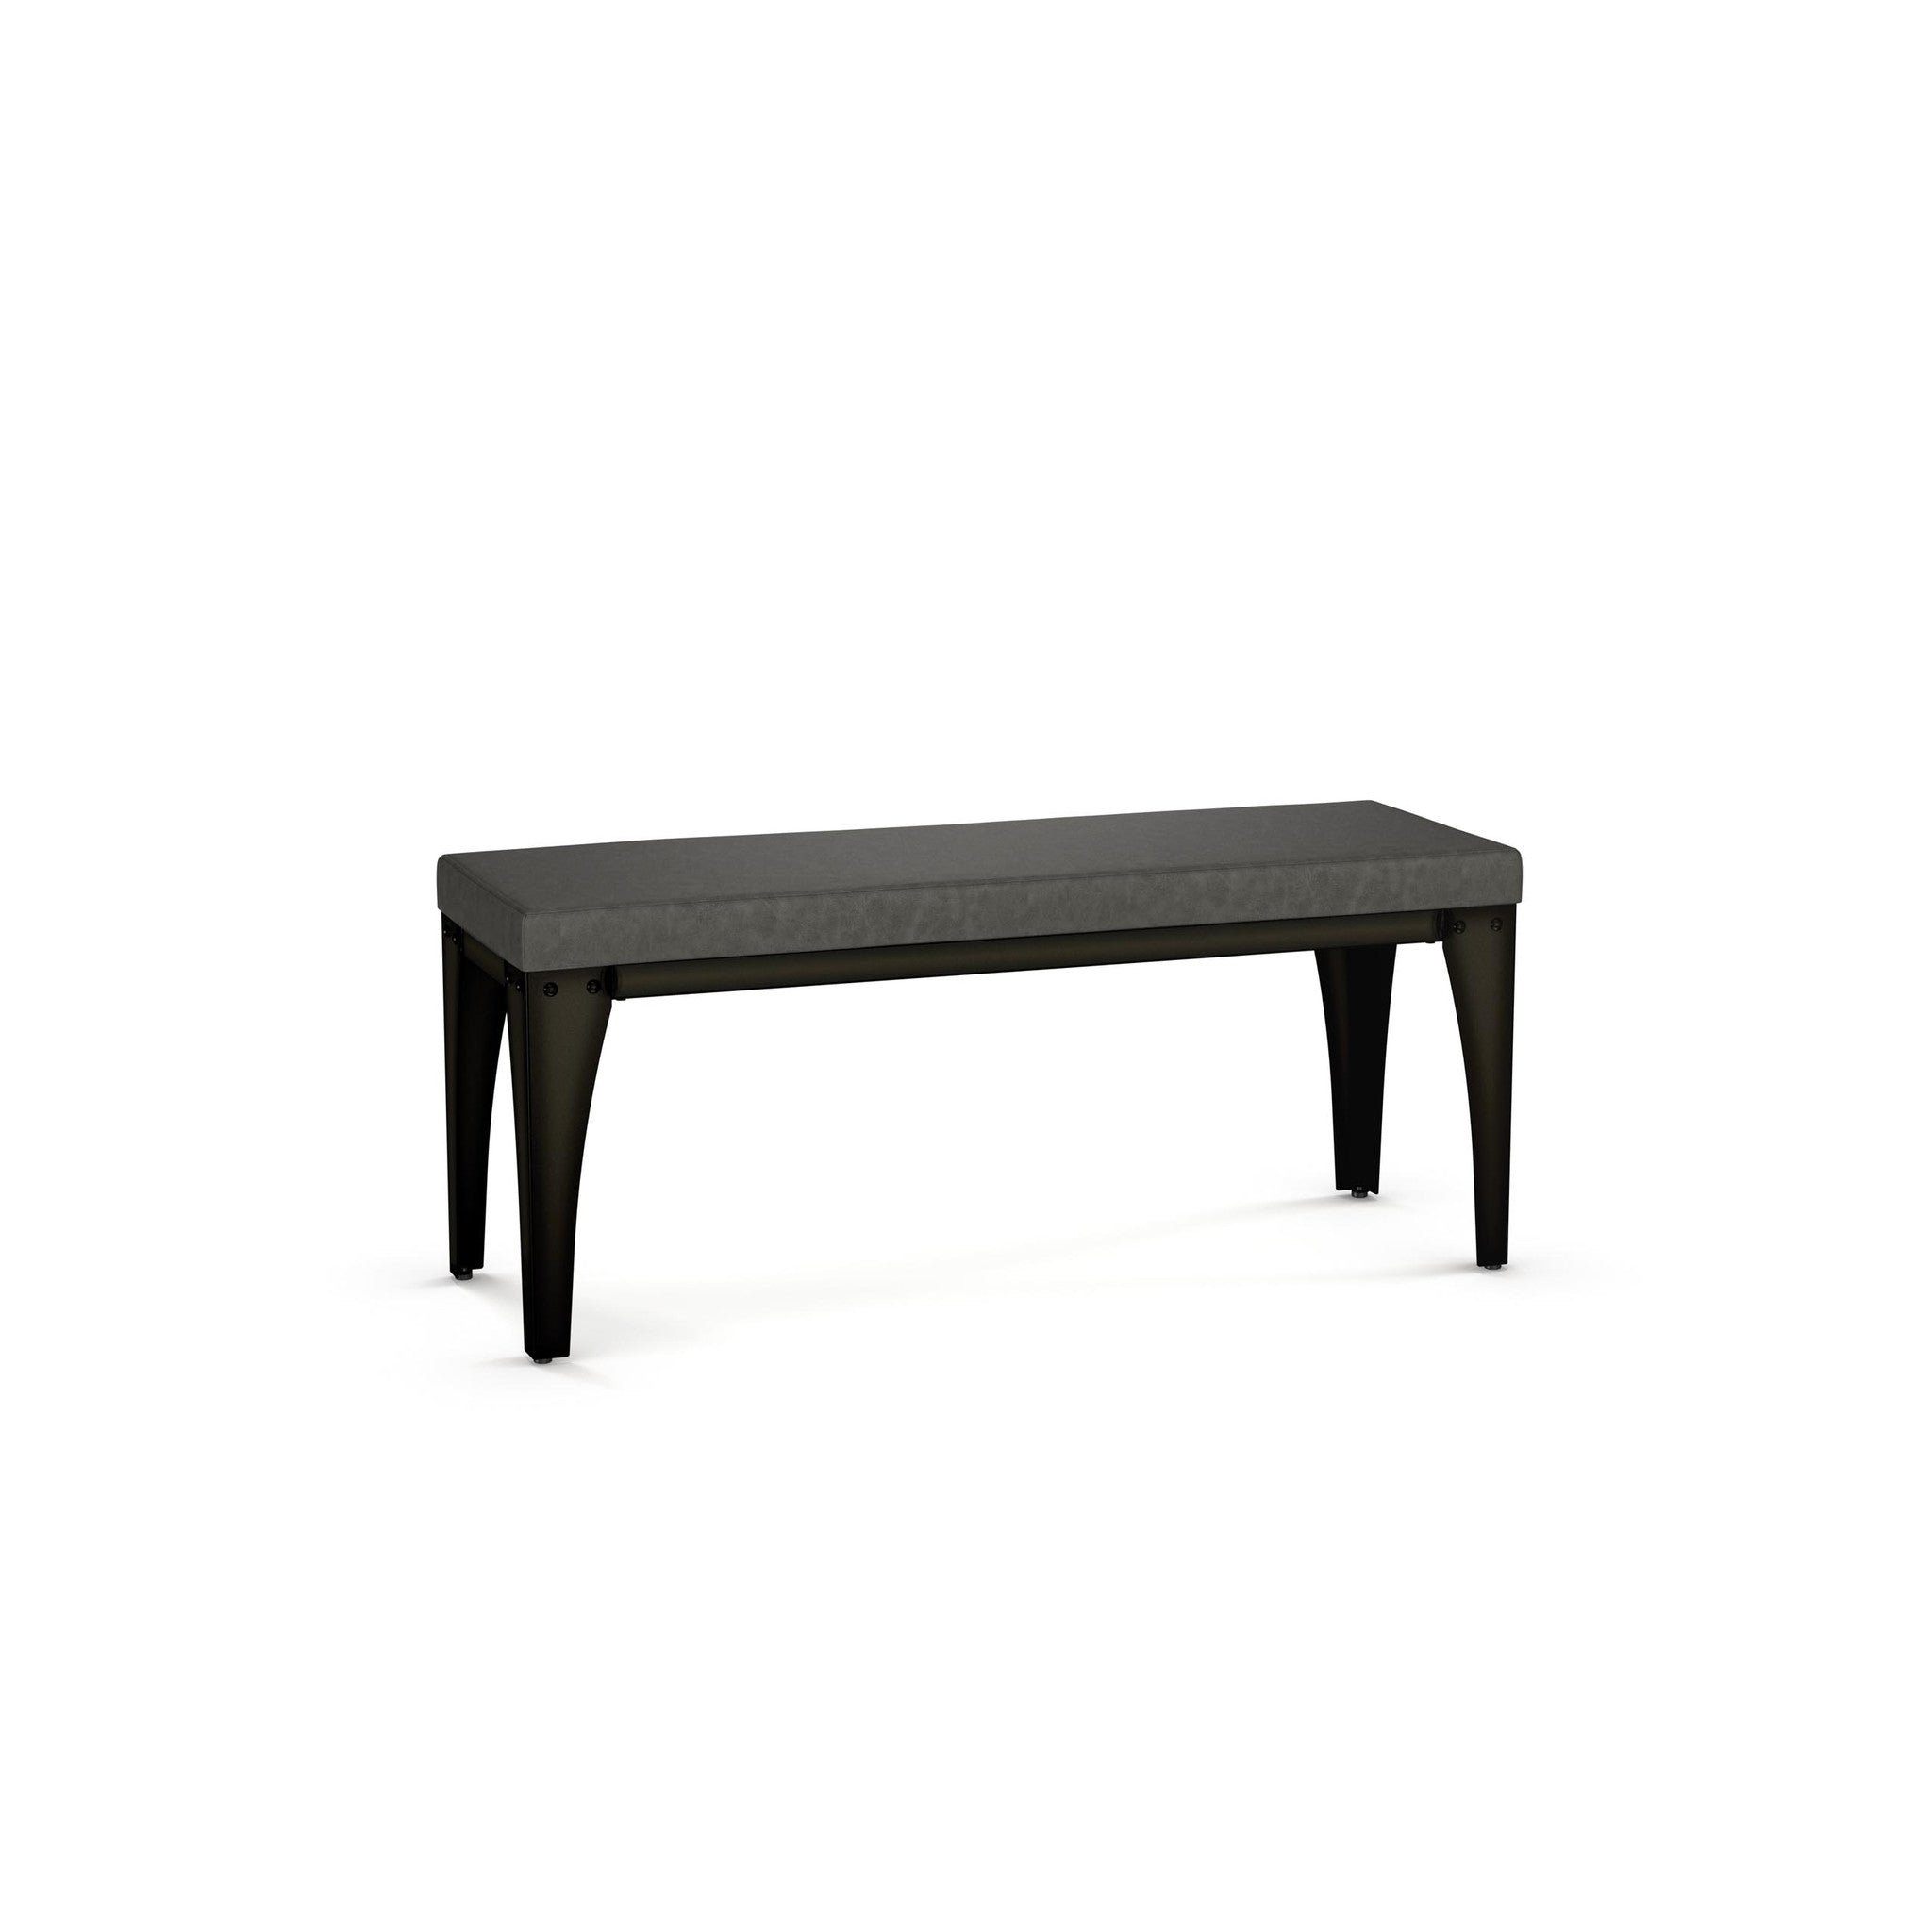 Picture of Upright Bench - 44" - Charcoal Fabric